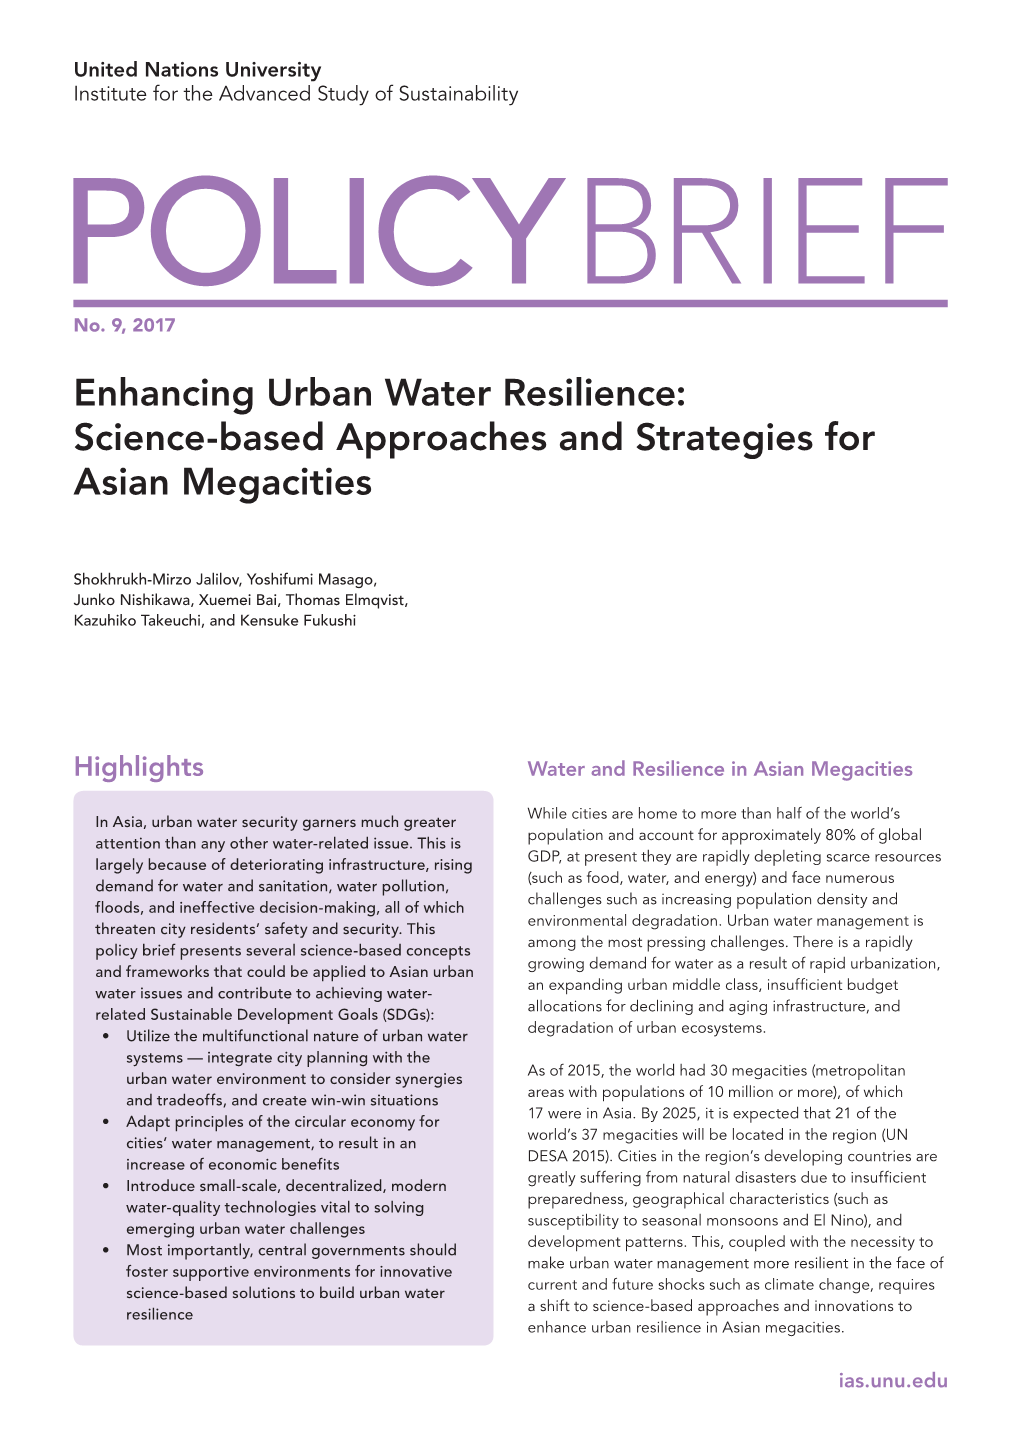 Enhancing Urban Water Resilience: Science-Based Approaches and Strategies for Asian Megacities